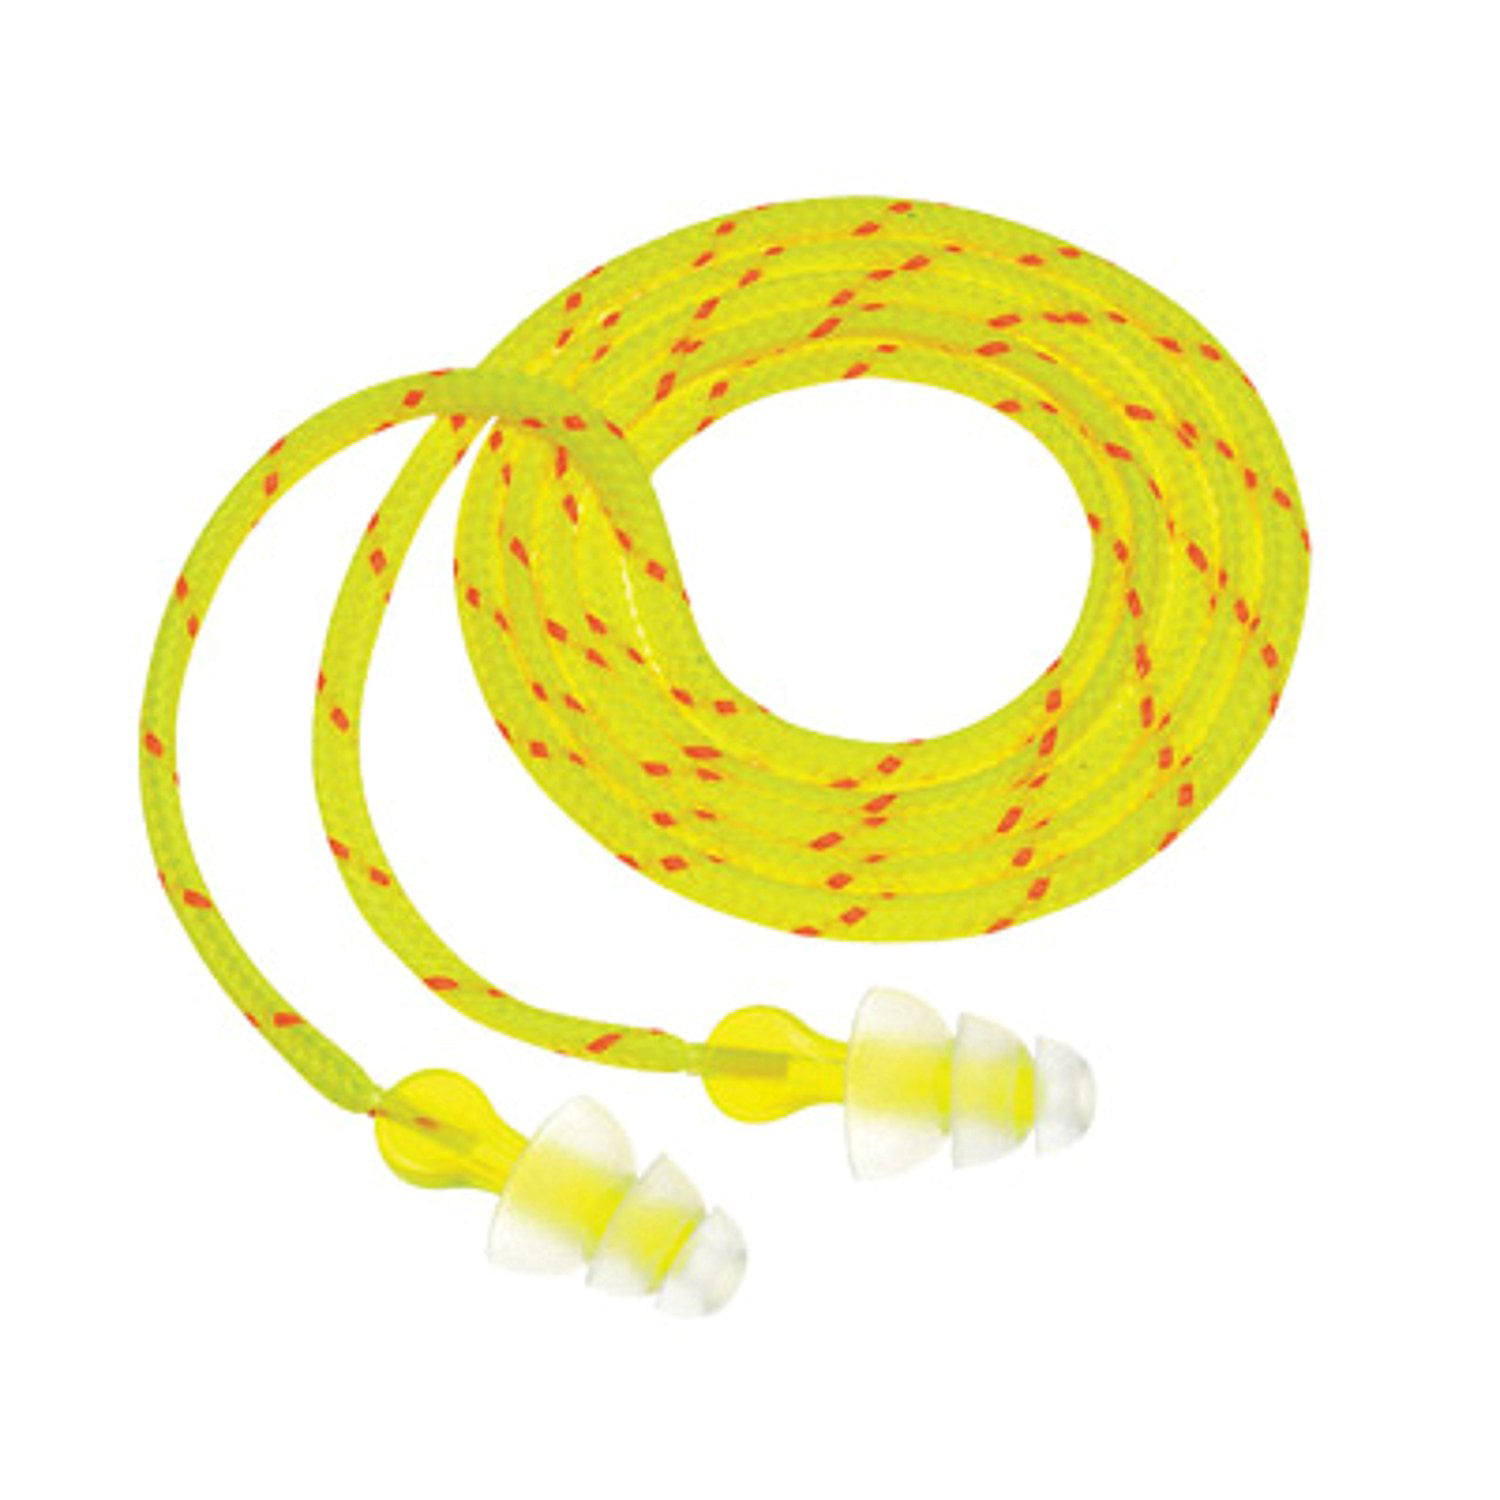 3M 90716-80025t Corded Reusable Earplug 3-pair With Case 90716 for sale online